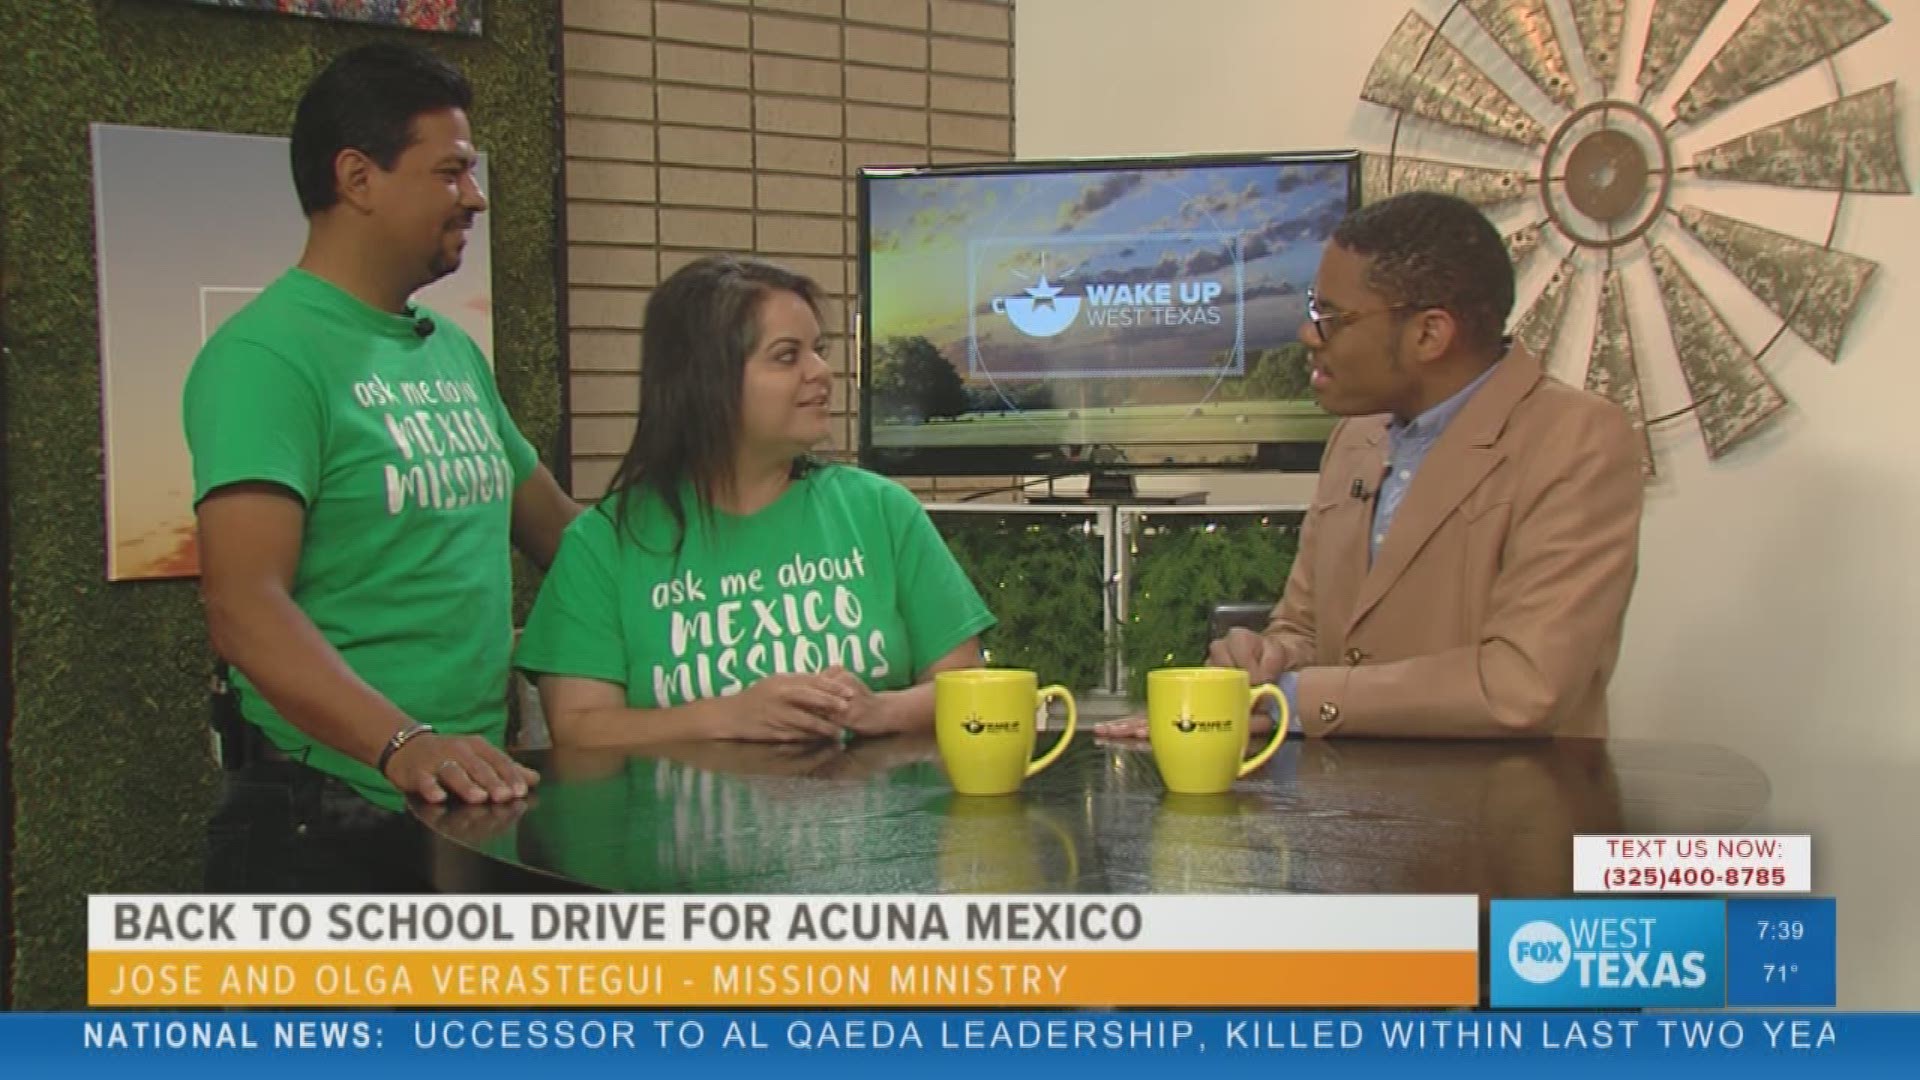 Our Malik Mingo spoke with two representatives from "Mexico Missions" about the back to school drive going on until August 8.